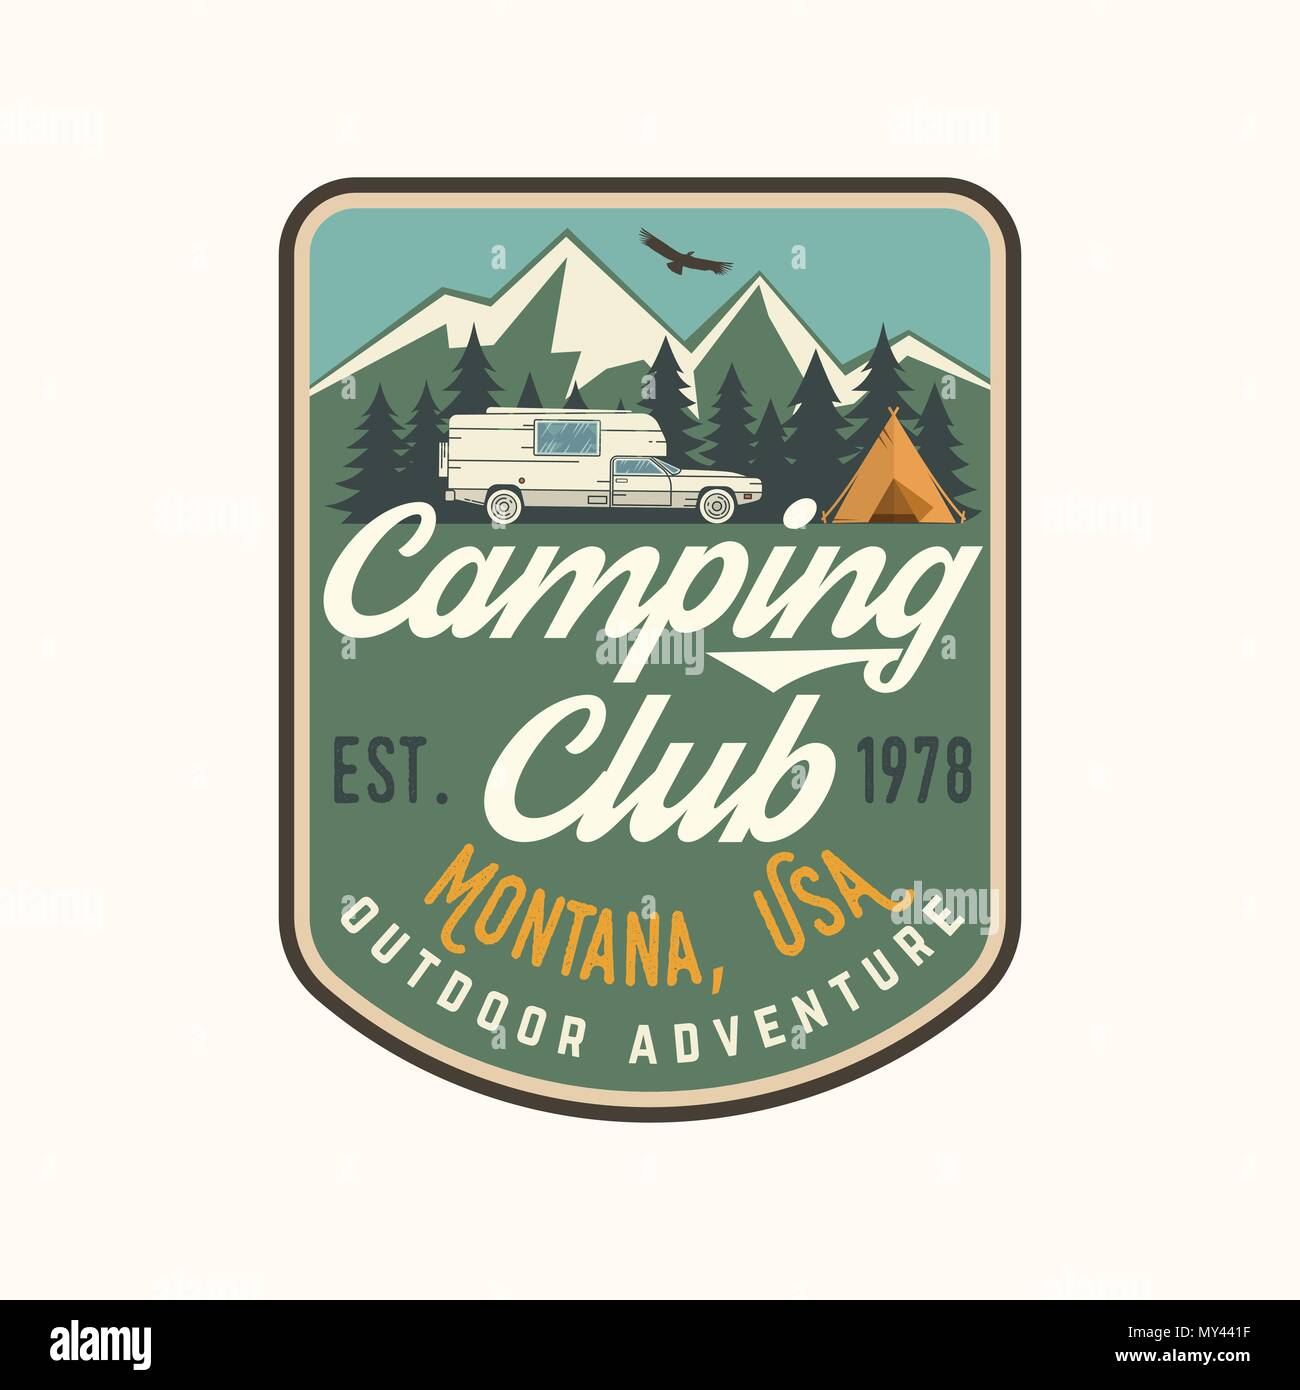 Camping club. Vector illustration. Concept for shirt or logo, print, stamp, paych or tee. Vintage typography design with Camper tent and forest silhouette. Stock Vector